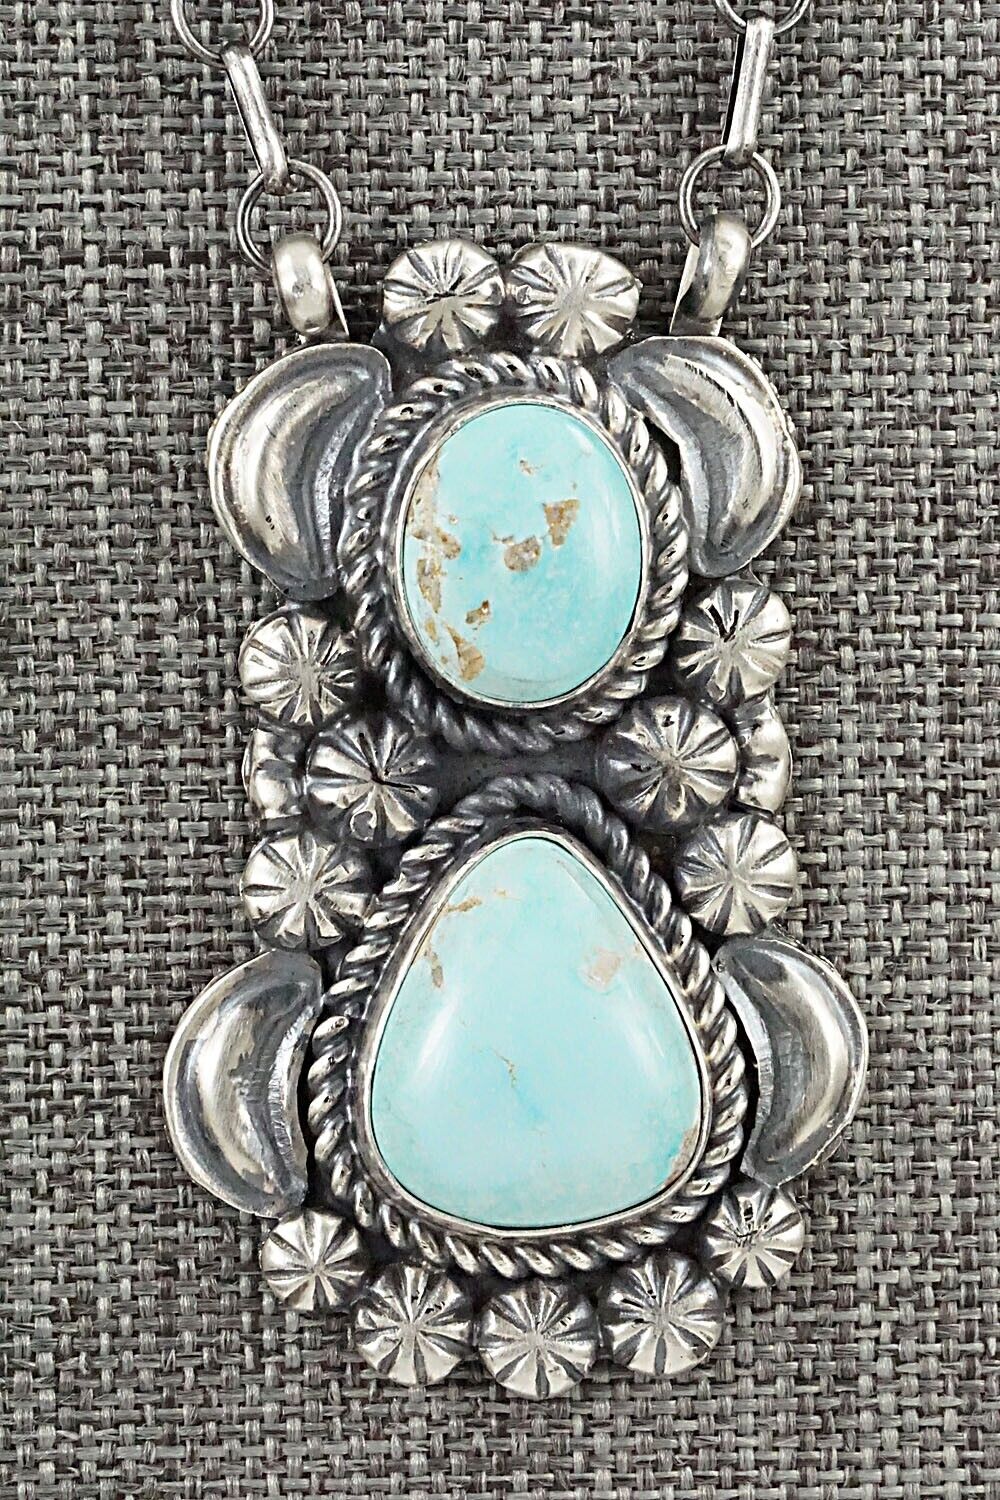 Turquoise & Sterling Silver Necklace - Jeff James